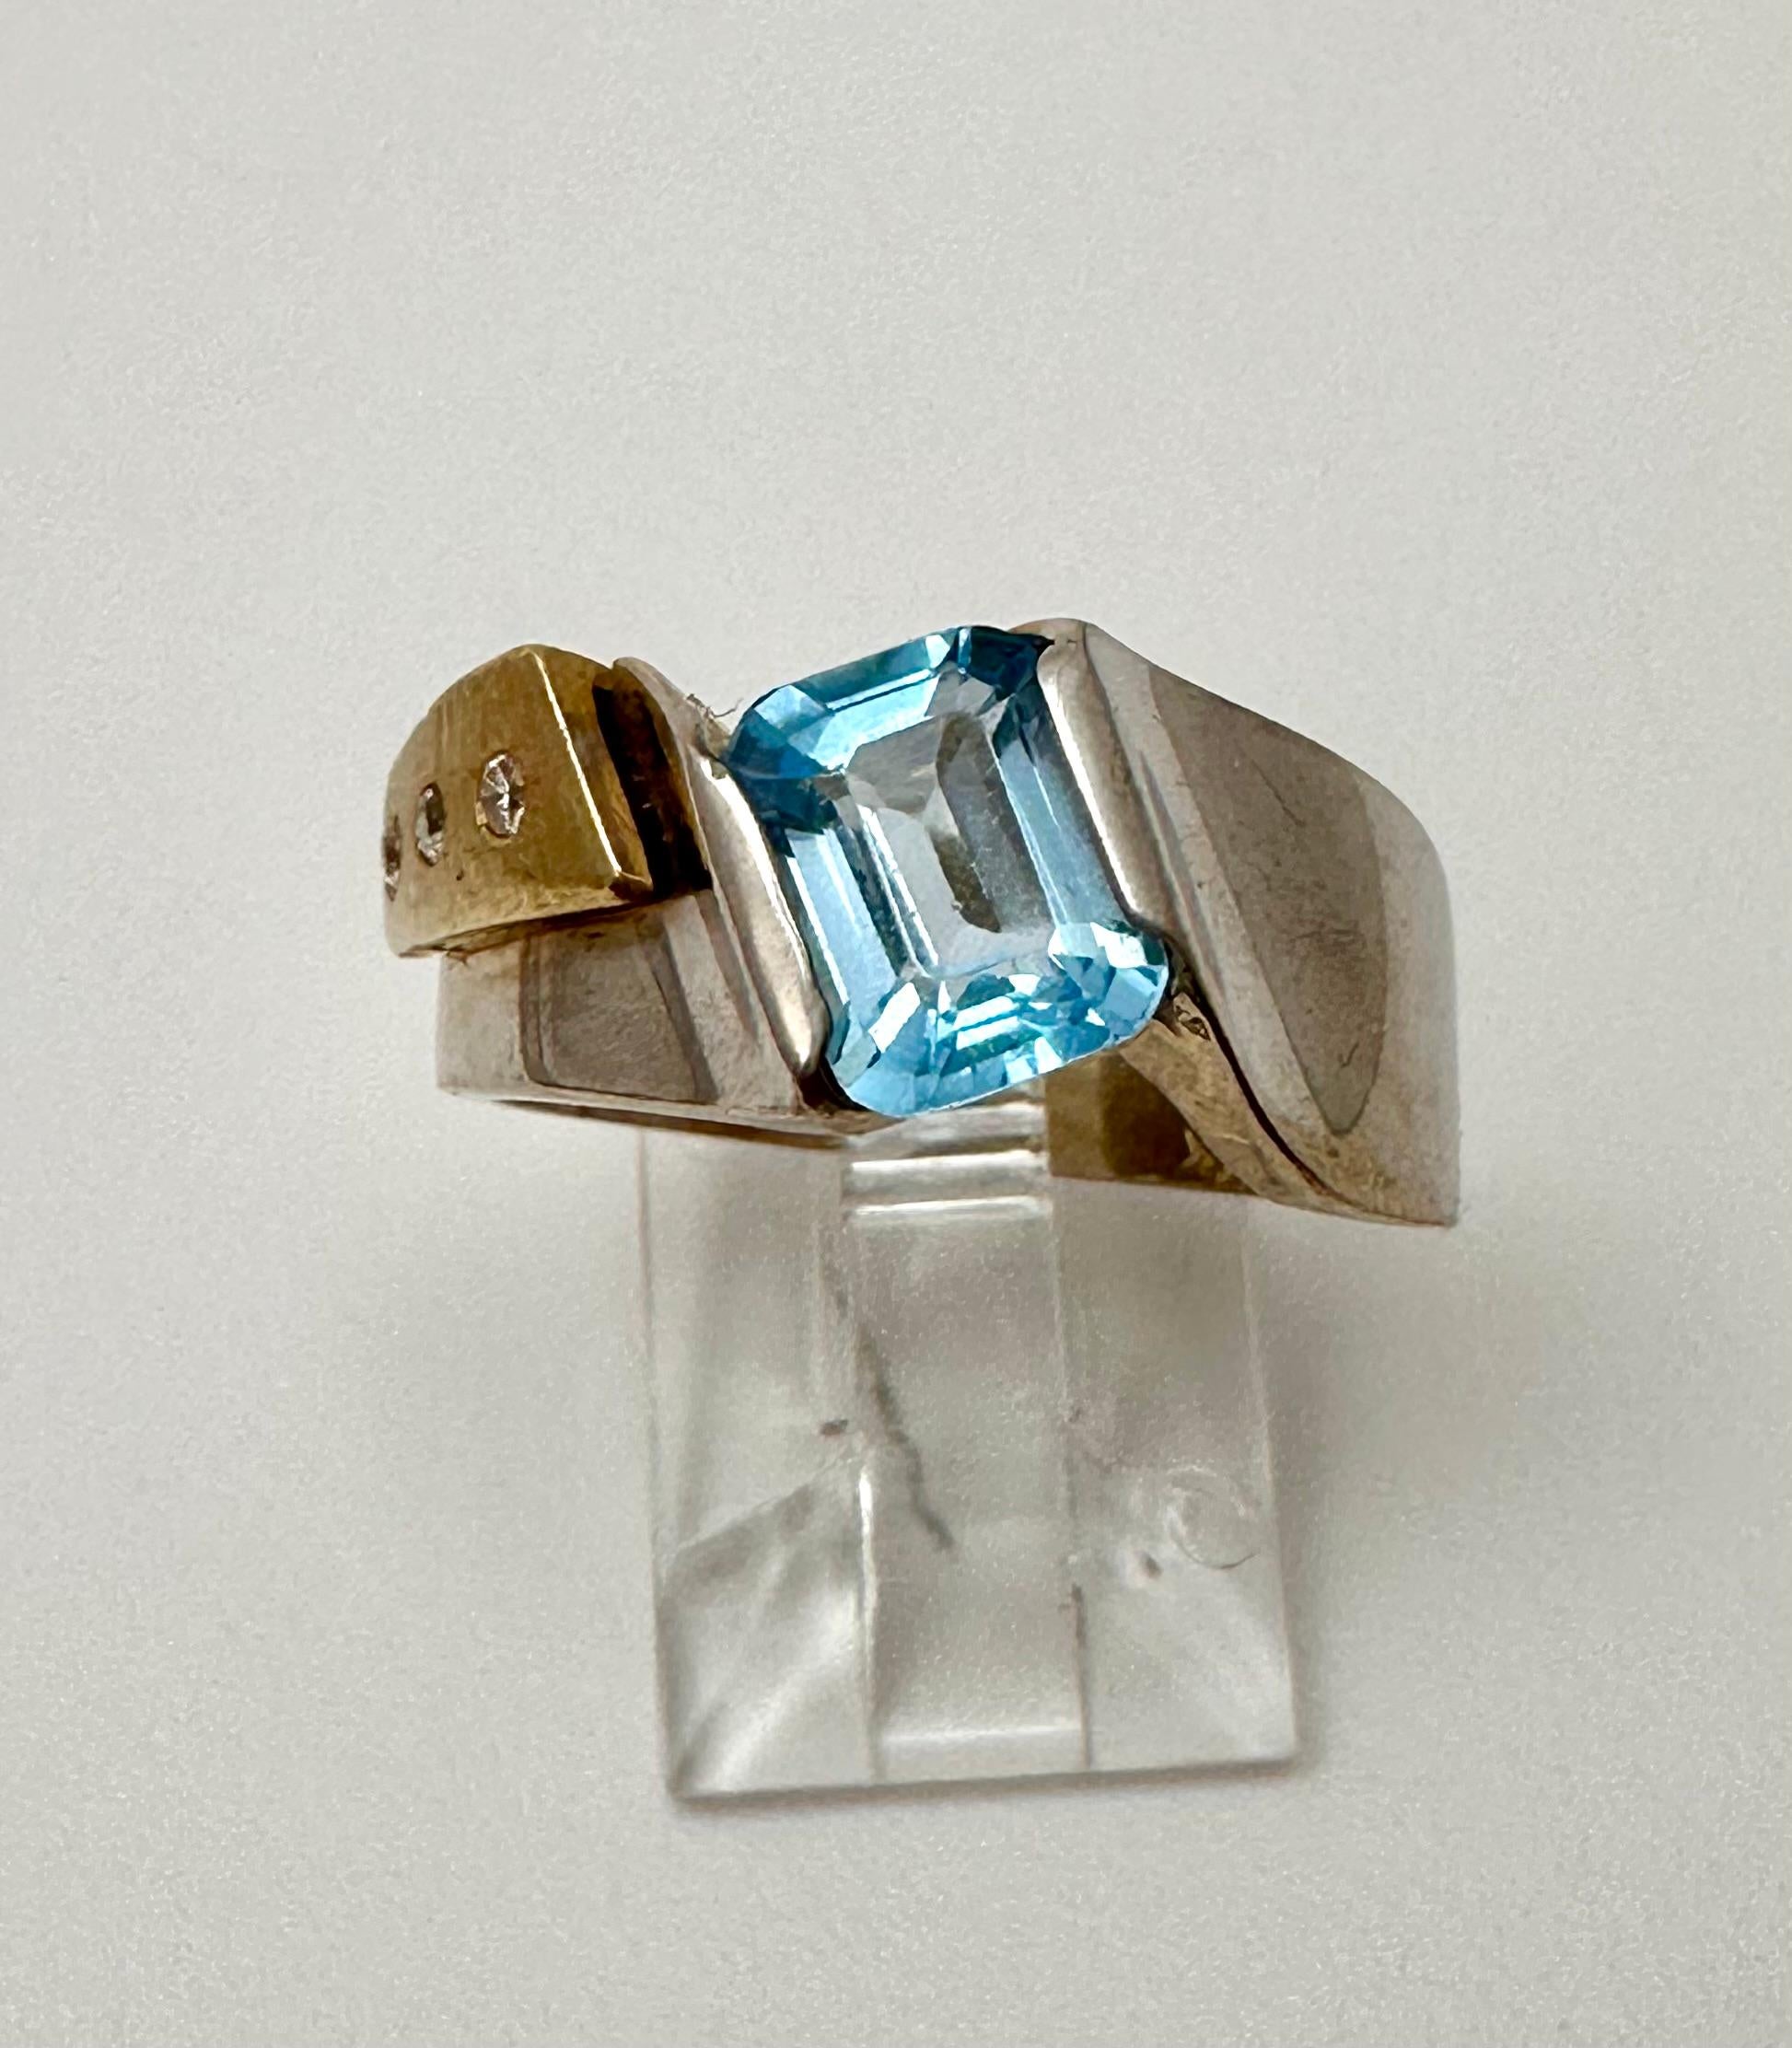 14k Yellow/White Gold 6mm x 8mm Emerald Cut Blue Topaz 3 round Diamonds
Ring Size  7 1/2

This stunning 14k yellow and white gold ring features a beautiful emerald cut blue topaz as the main stone, with a total of 3 diamonds. The rectangular shape